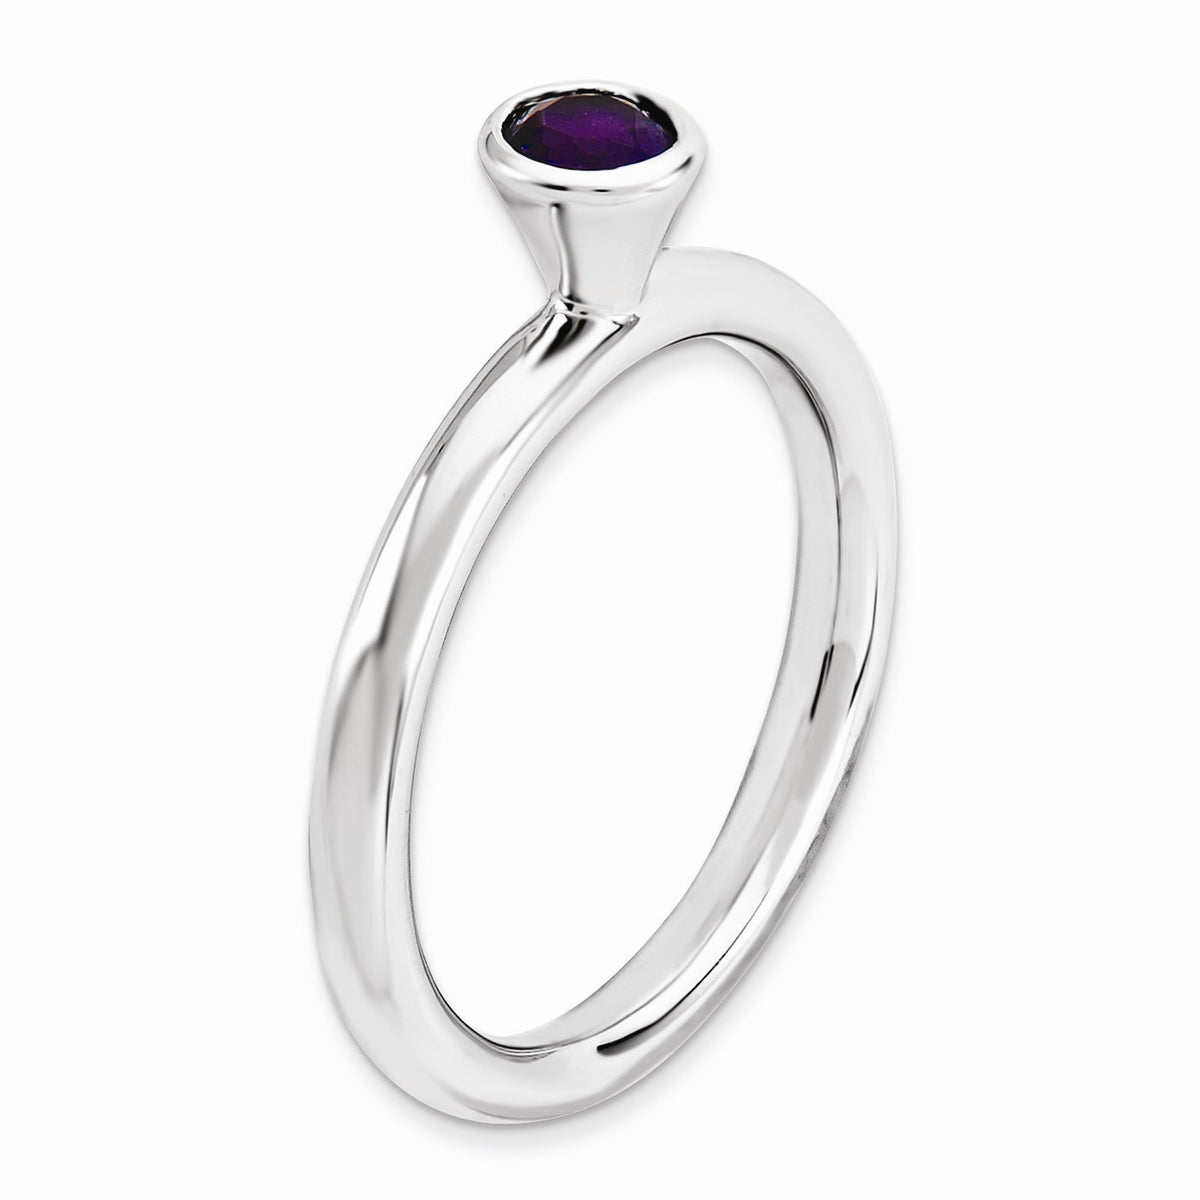 Alternate view of the Rhodium Plated Sterling Silver High Profile 4mm Amethyst Stack Ring by The Black Bow Jewelry Co.